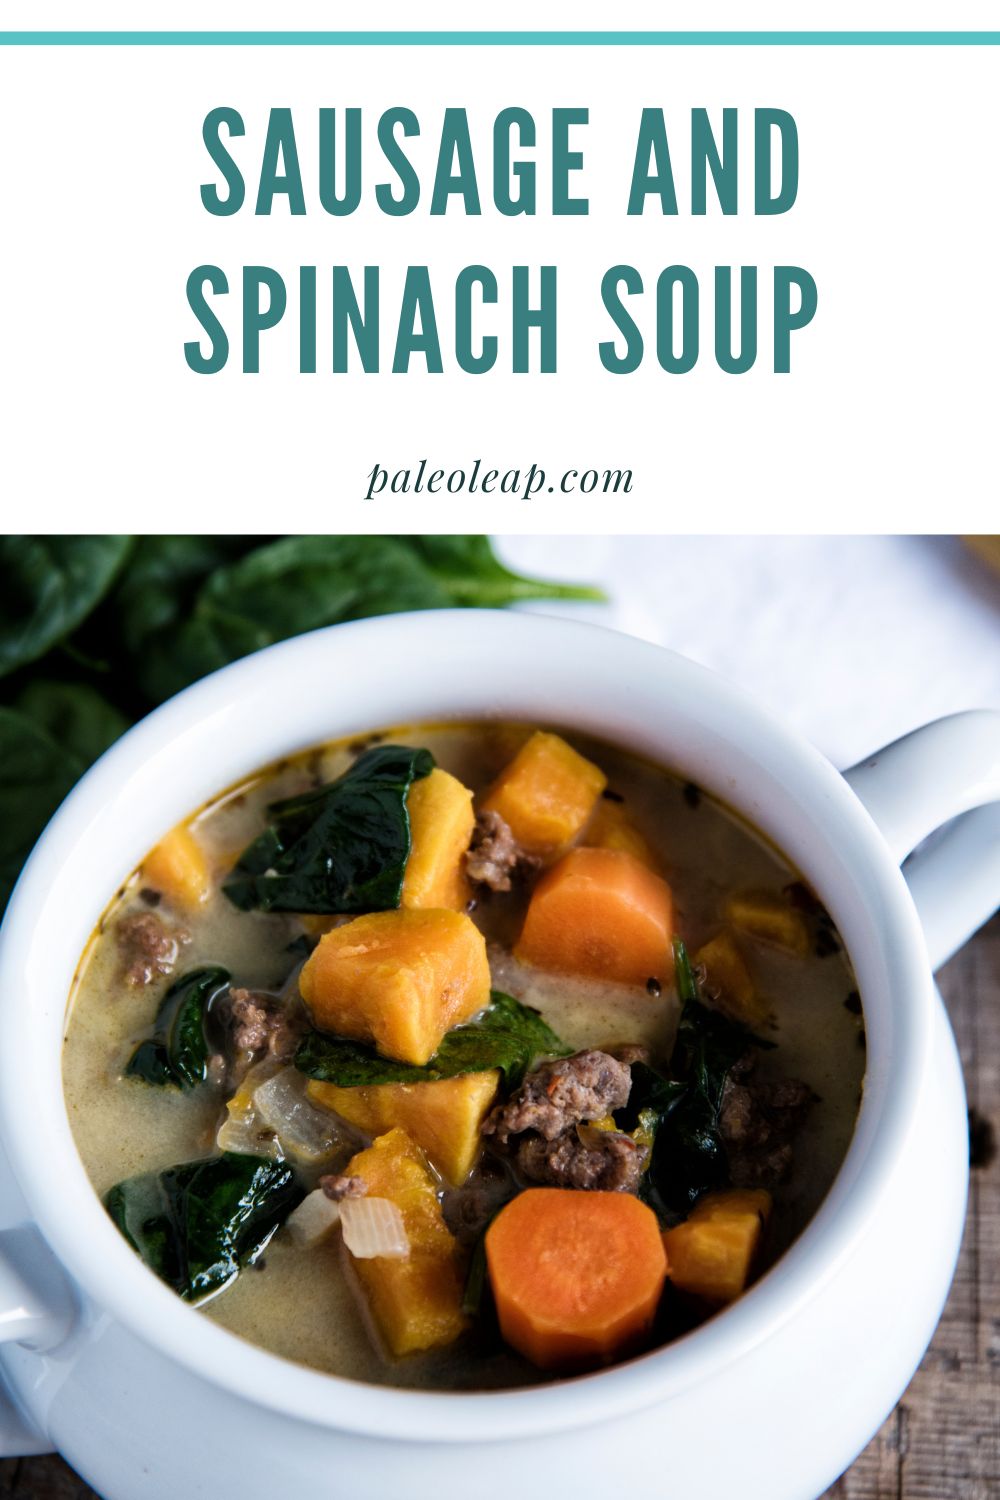 Sausage And Spinach Soup Recipe | Paleo Leap